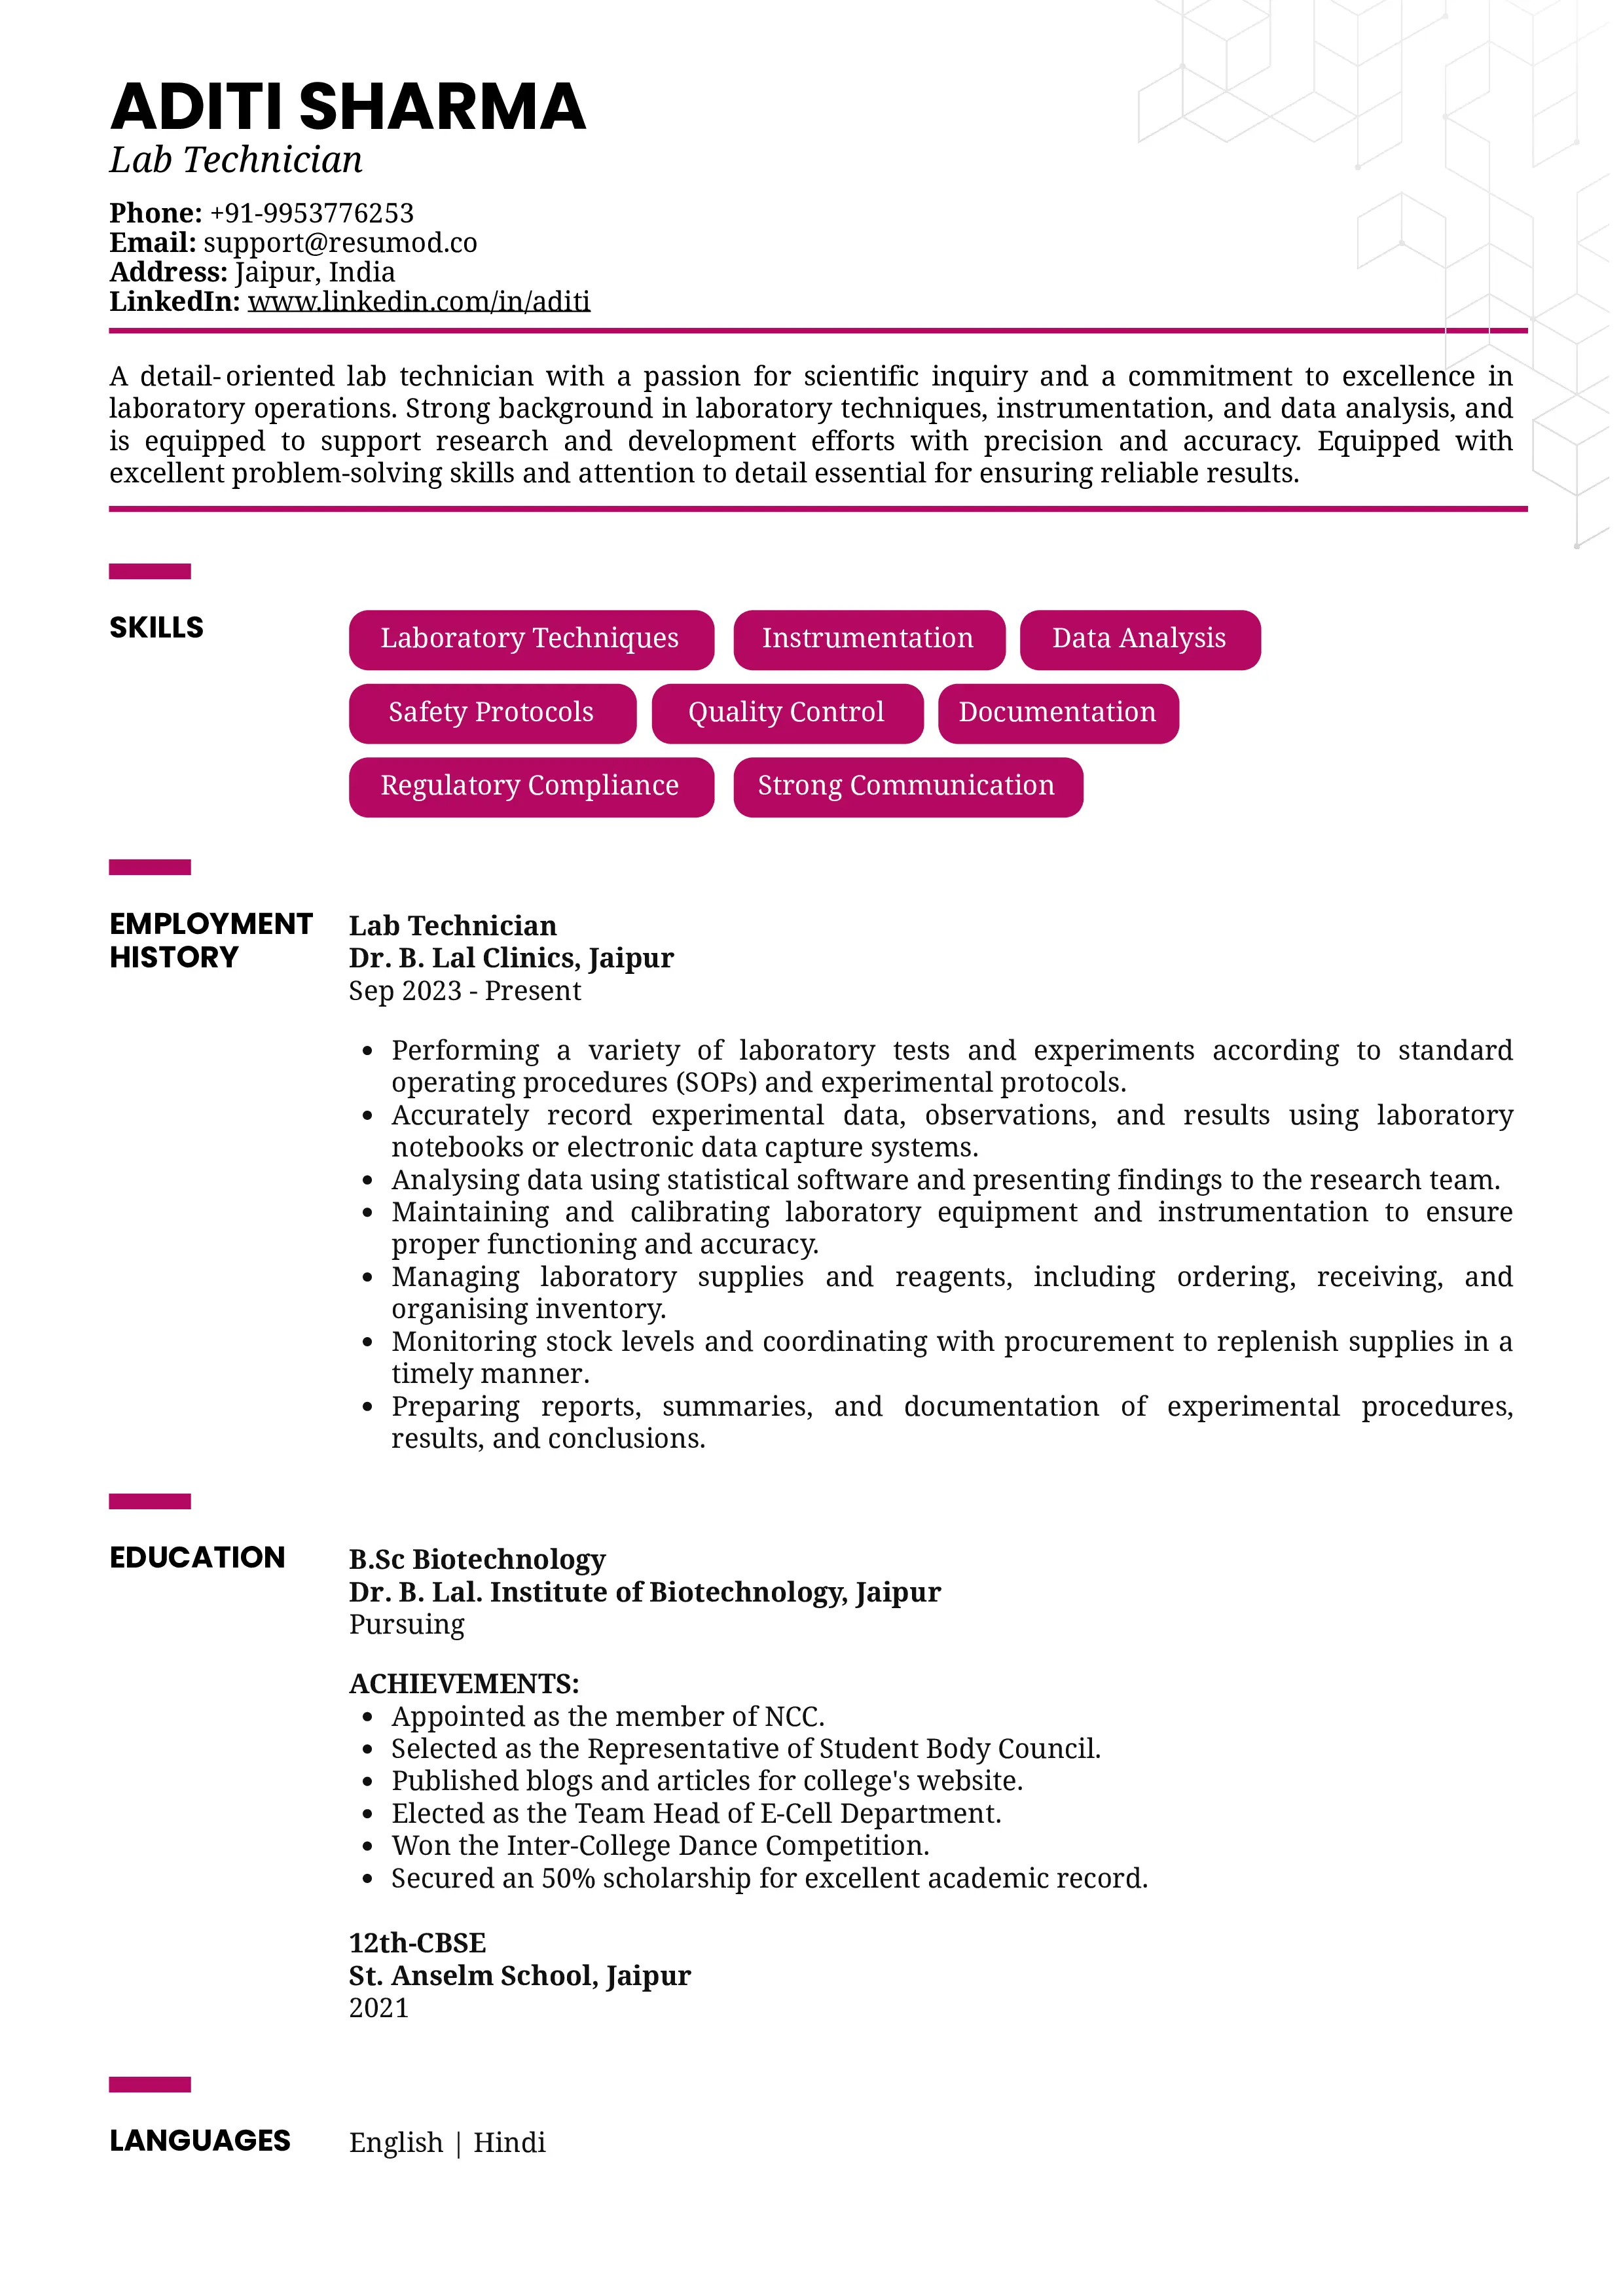 Sample Resume of Lab Technician | Free Resume Templates & Samples on Resumod.co